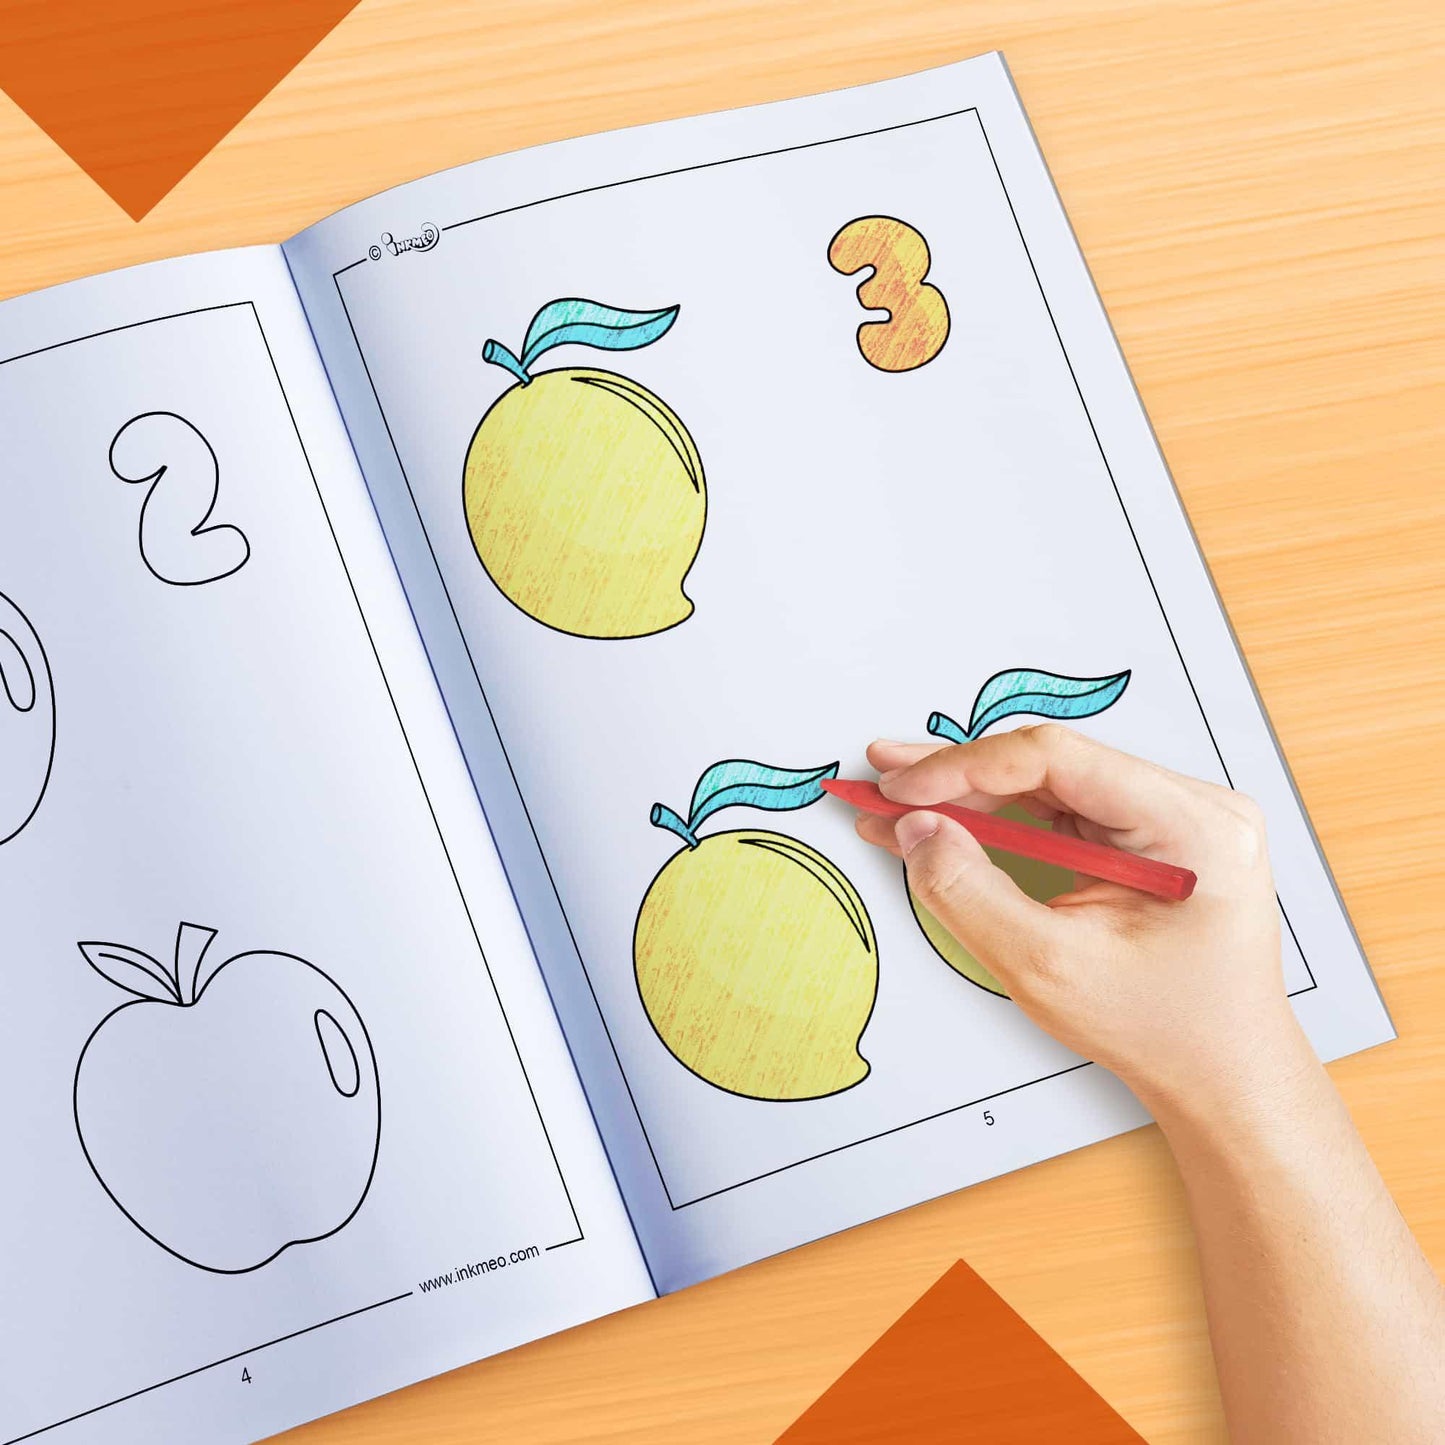 The image depicts a hand coloring a book with crayons.